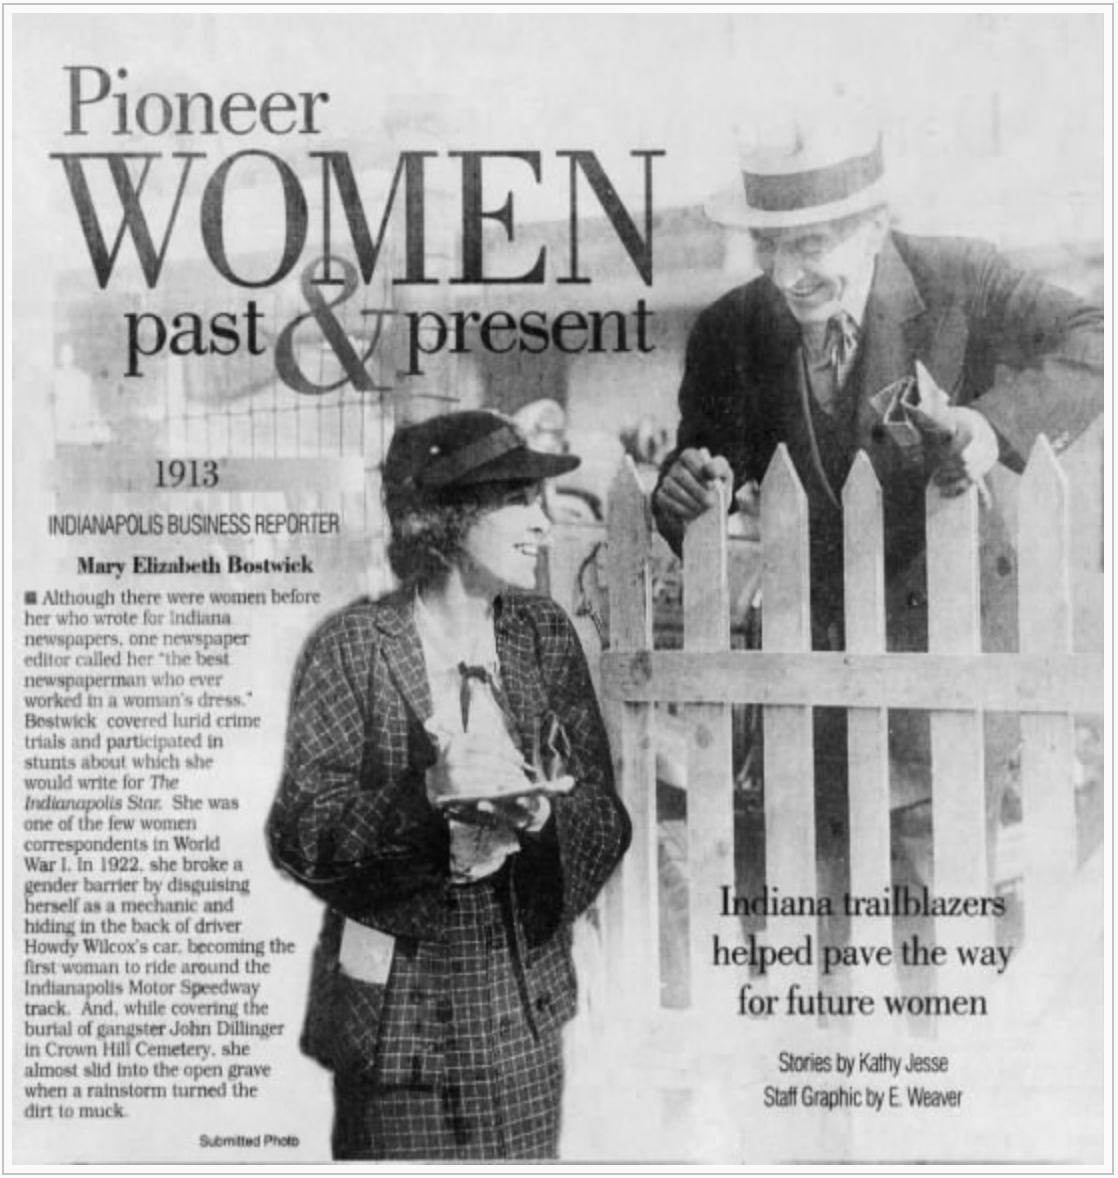 This picture of the article shows, along with the text, a woman writing in a notepad while speaking to a man who is leaning over a picket fence. The title of the article is "Pioneer Women past & present".